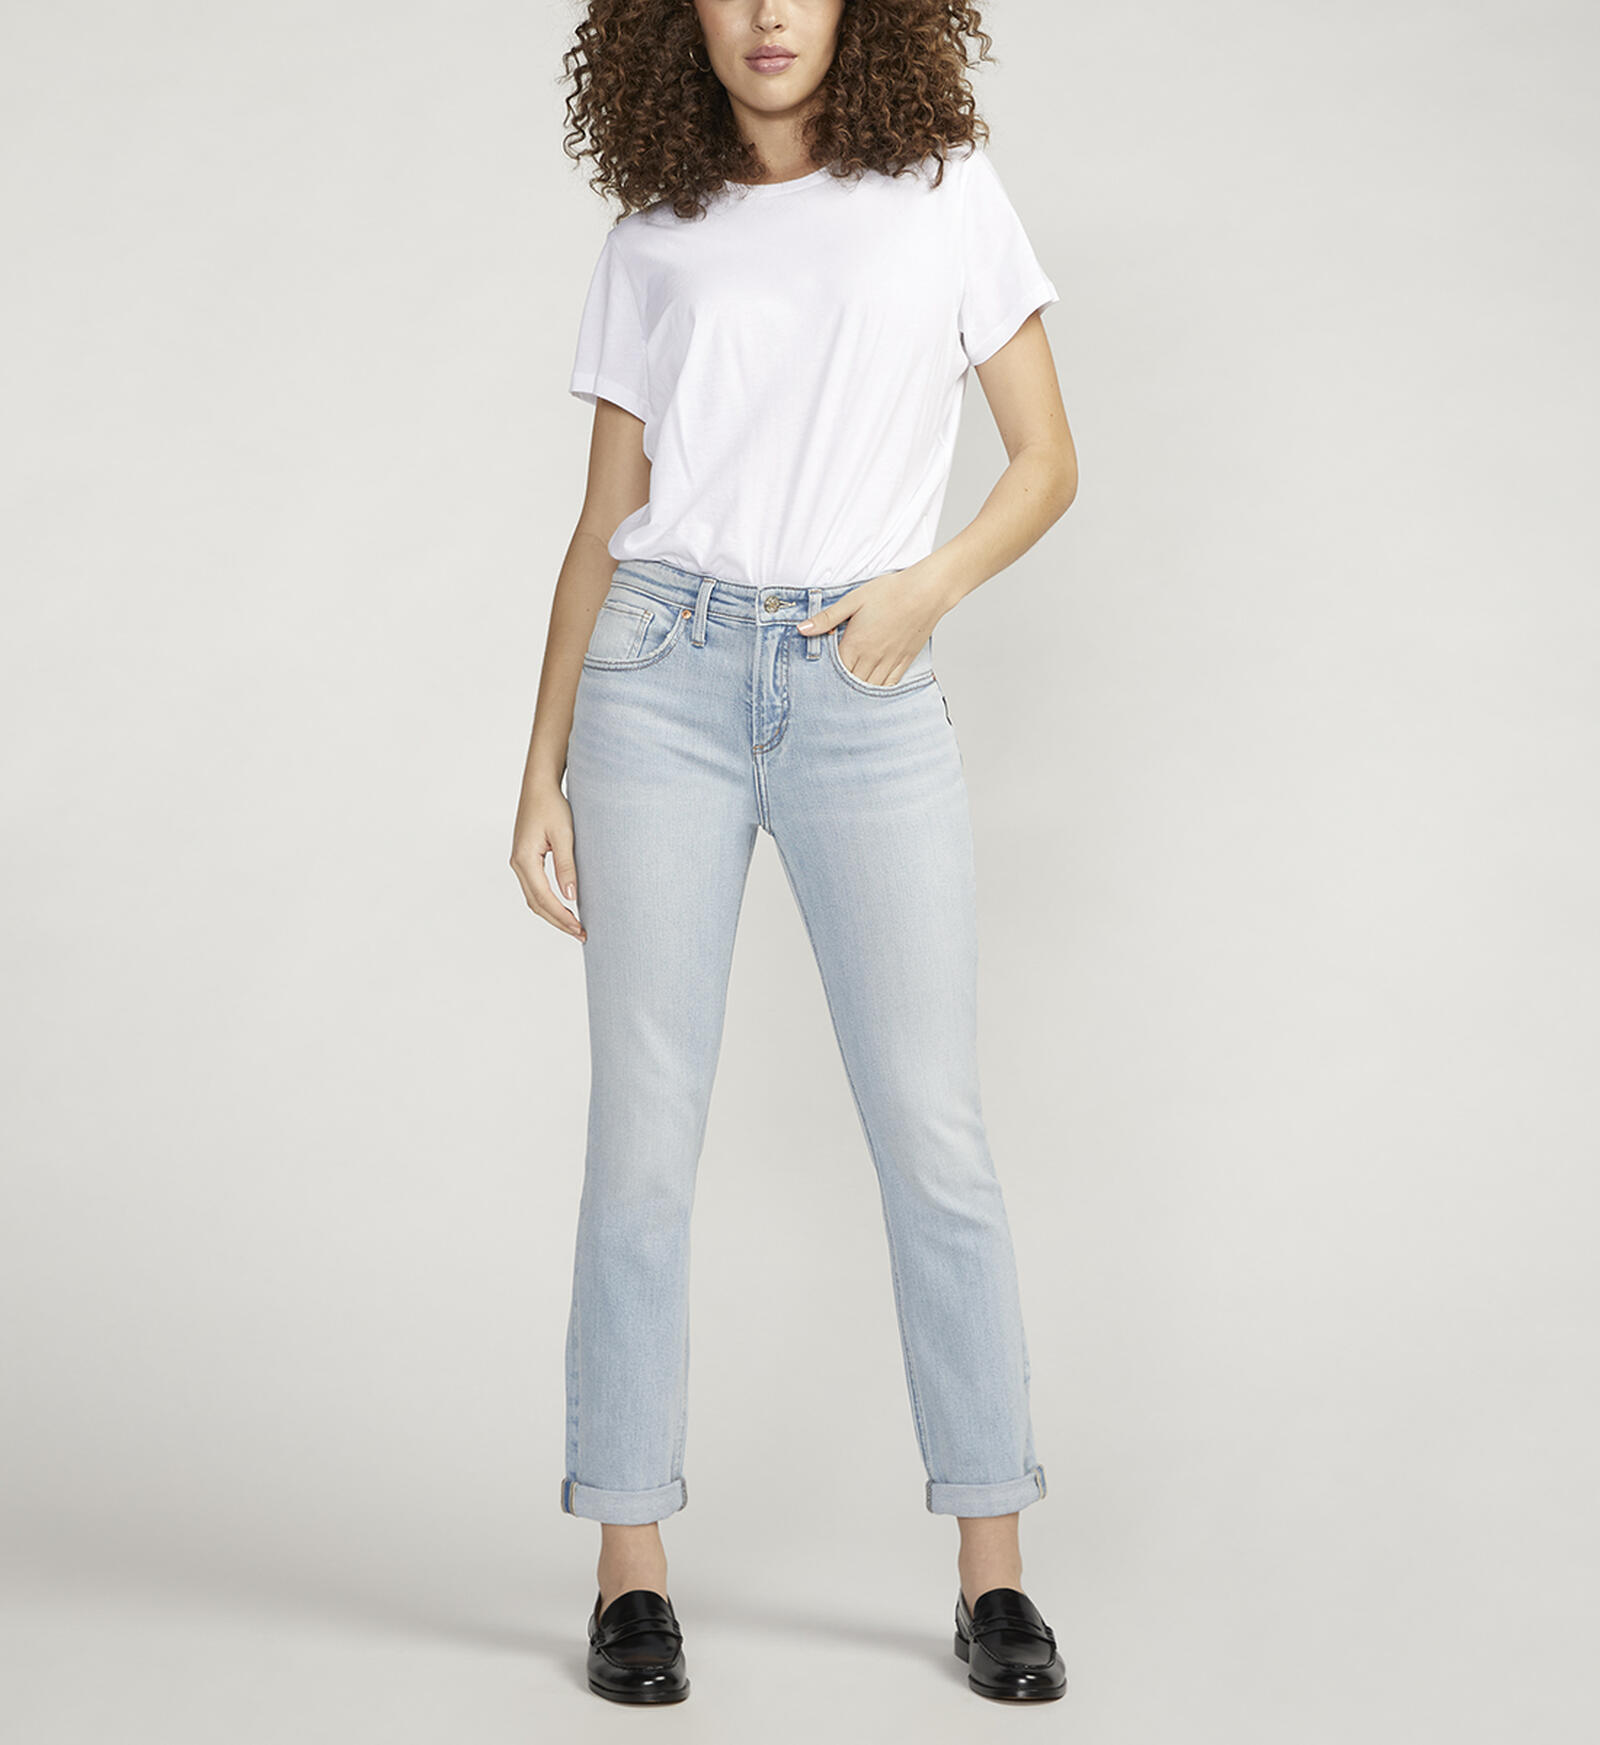 Le Silhouette Slim Bootcut Jeans With High Rise - Precious Blue